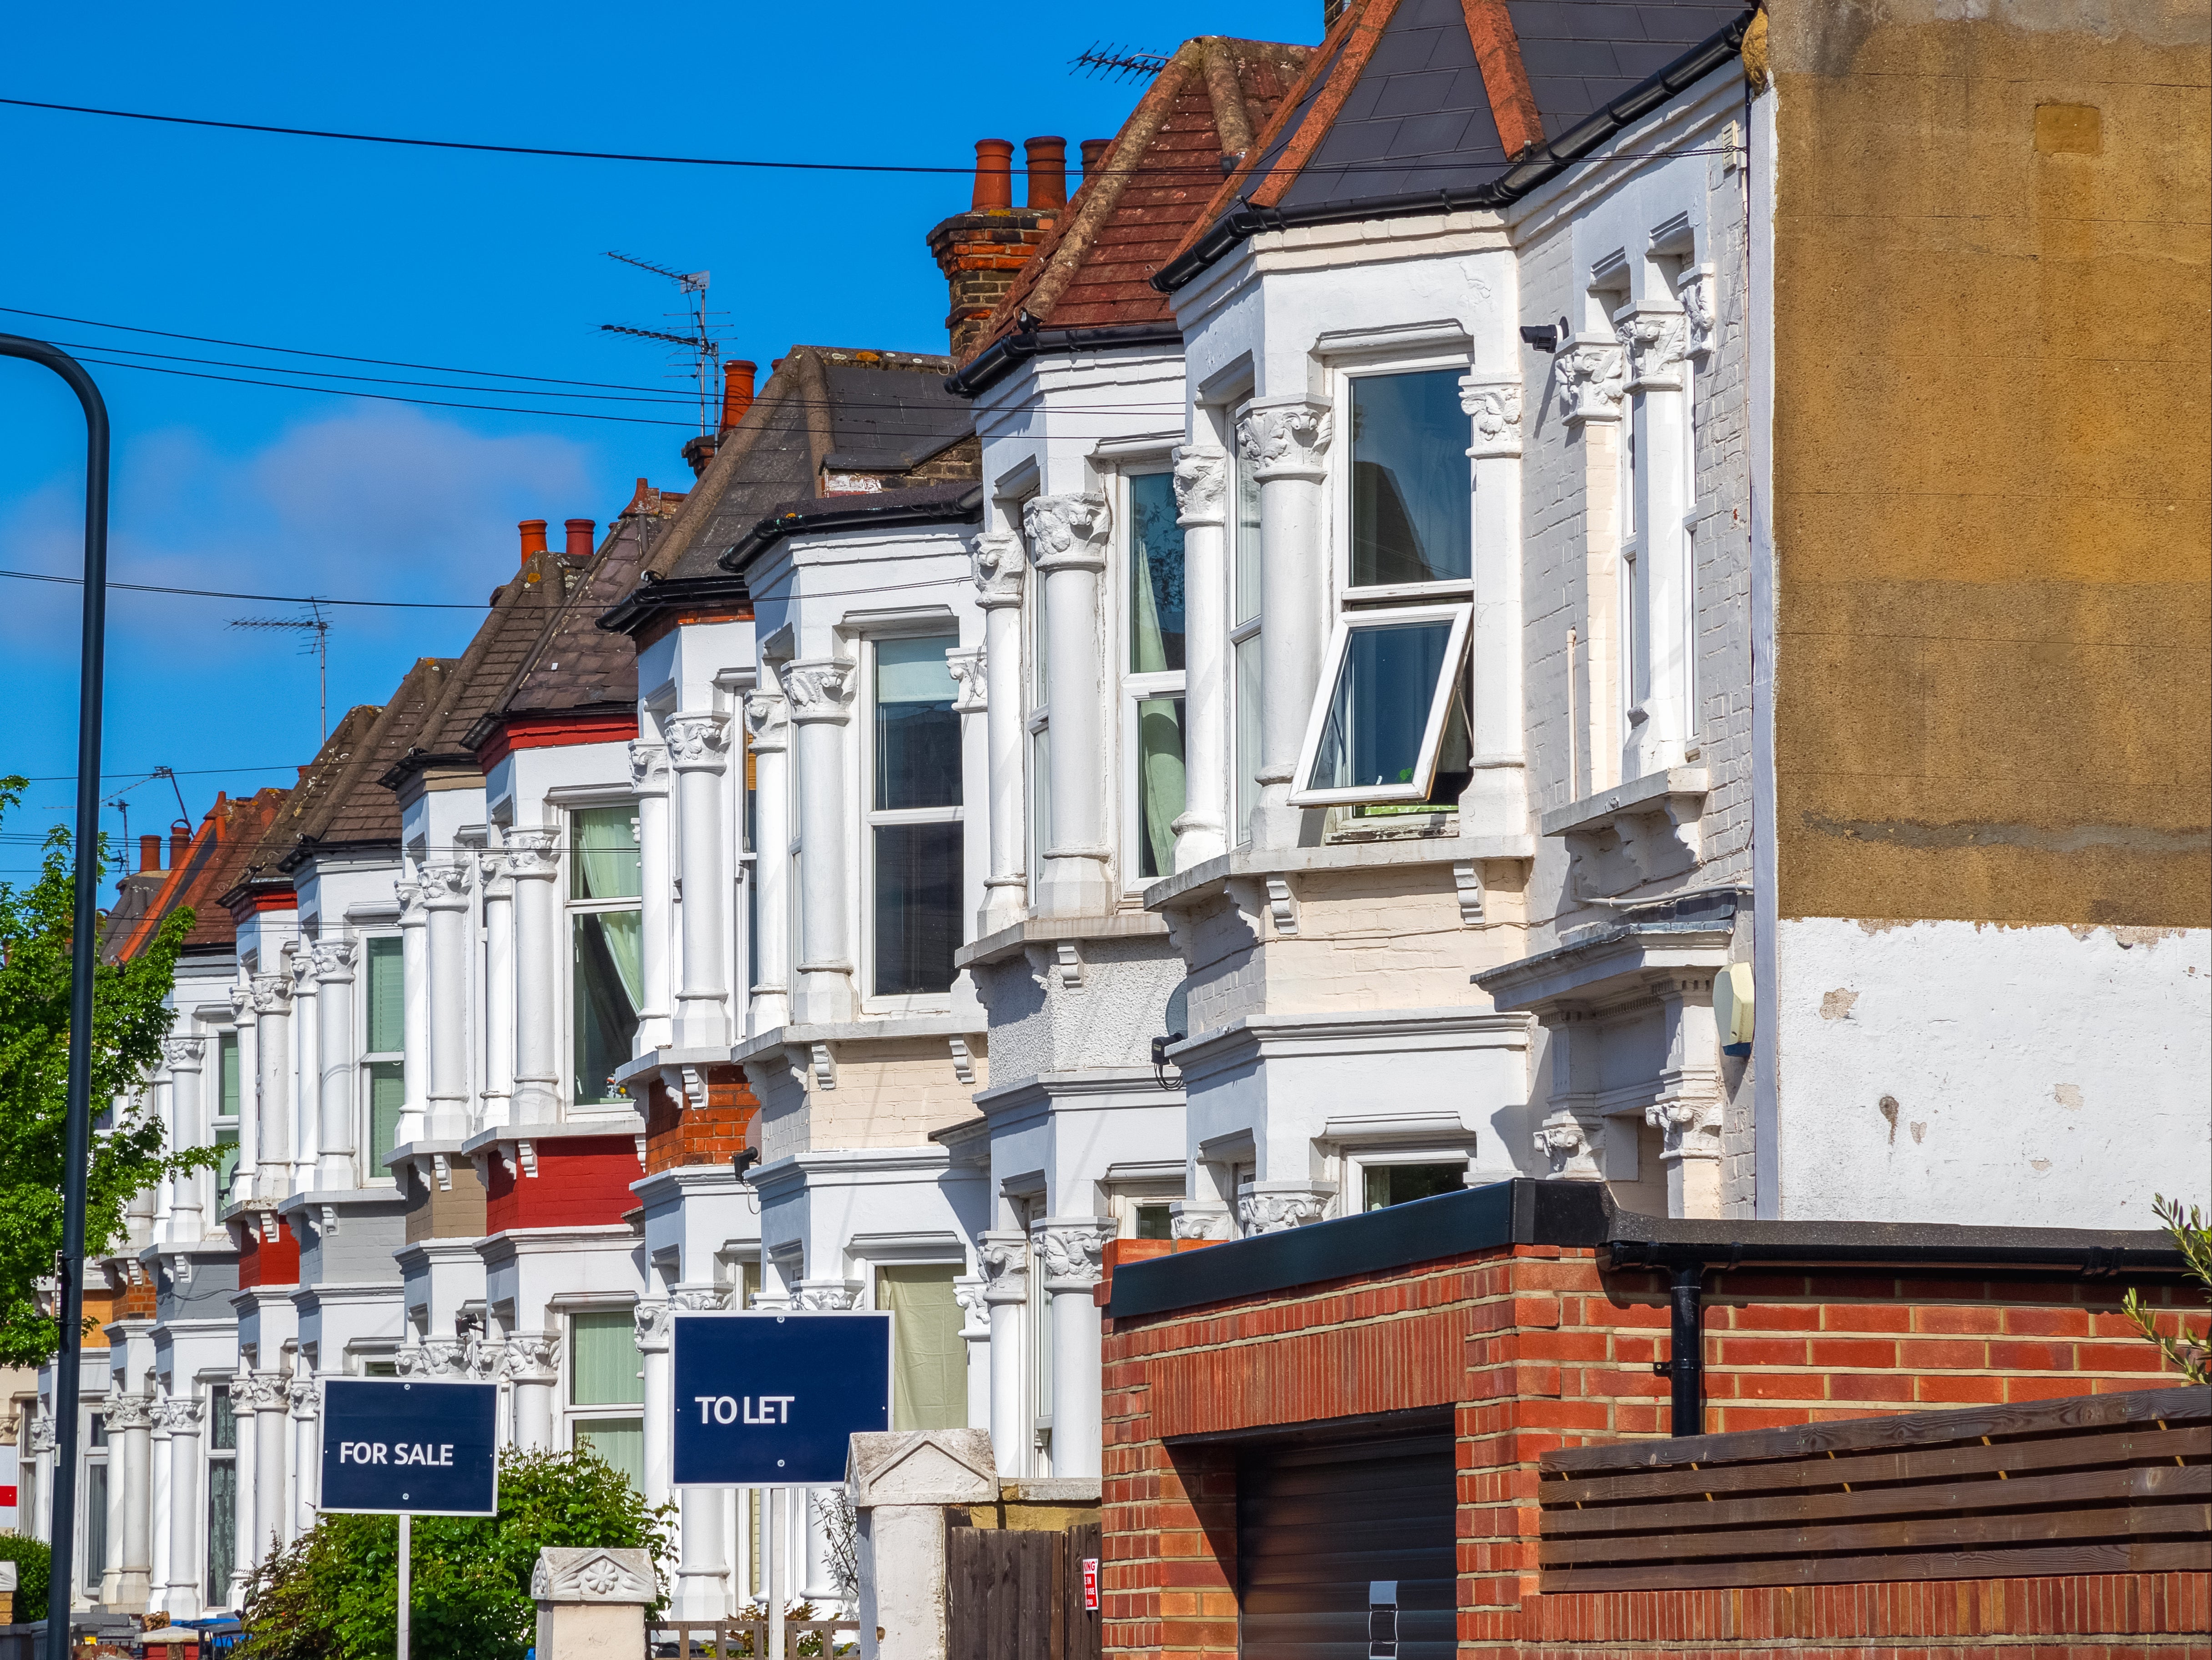 UK house prices have hit a new record high, according to property website Zoopla